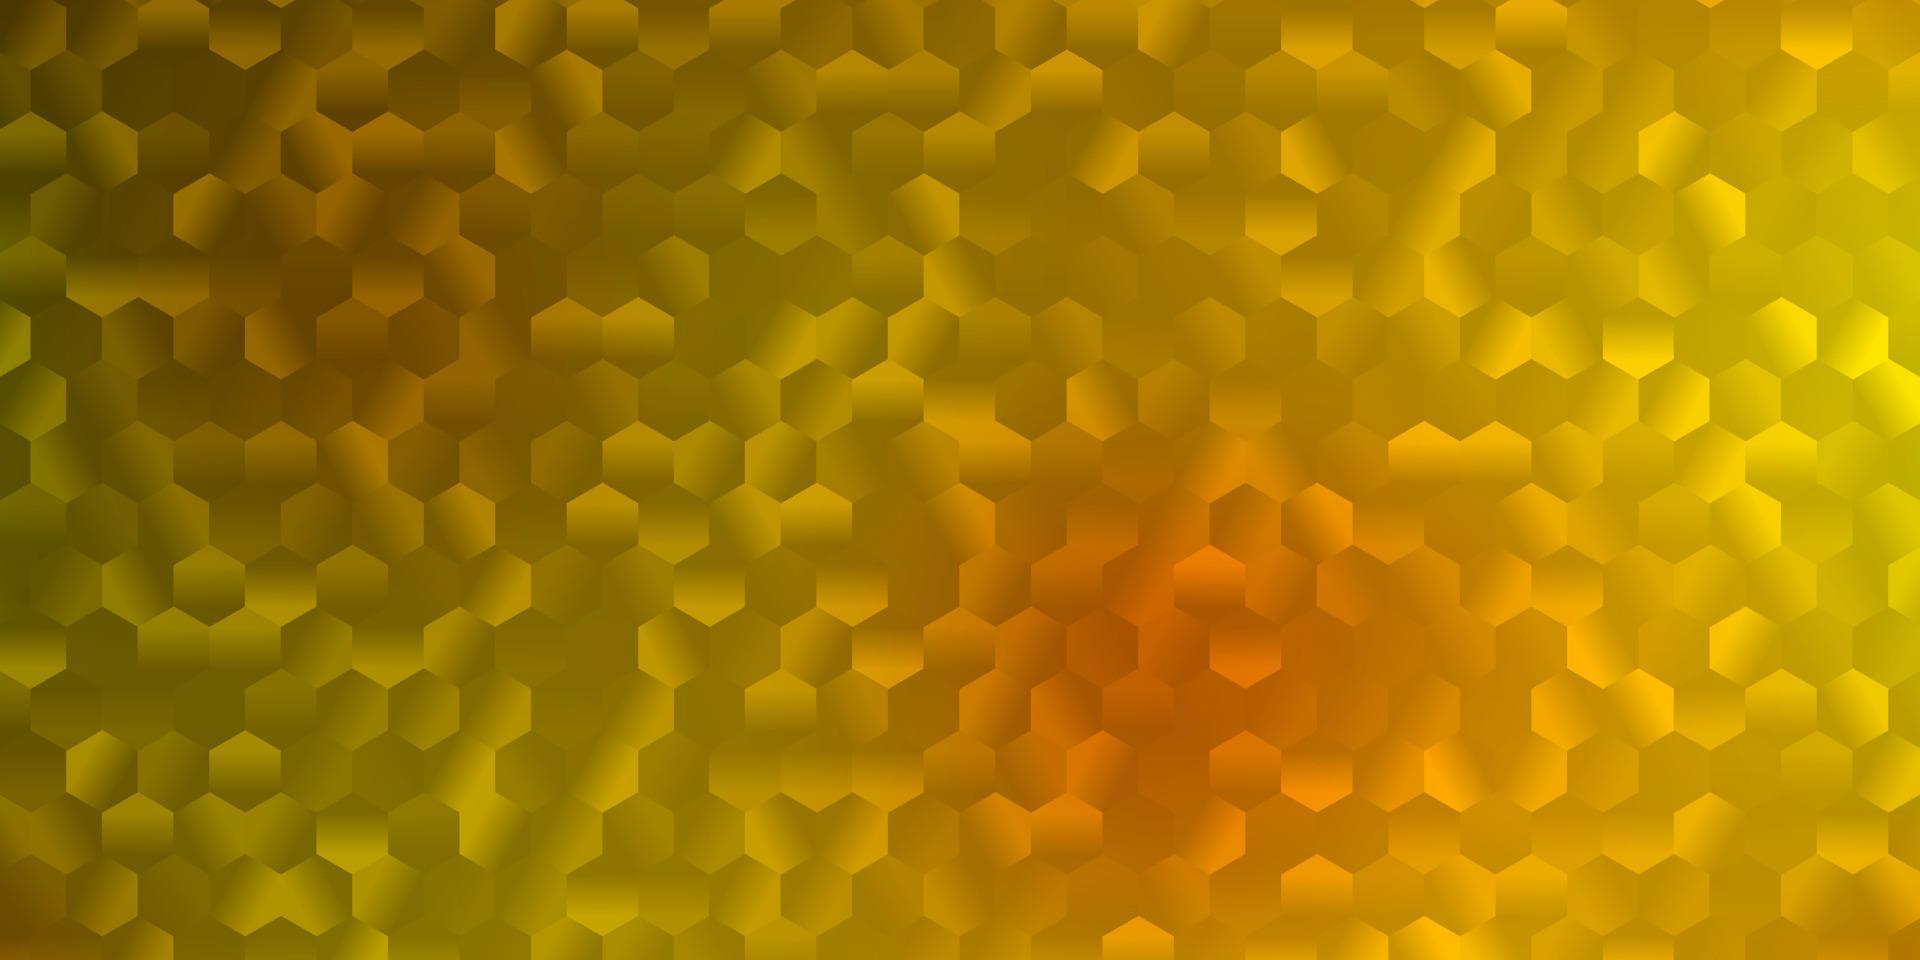 Light yellow vector pattern with hexagons.